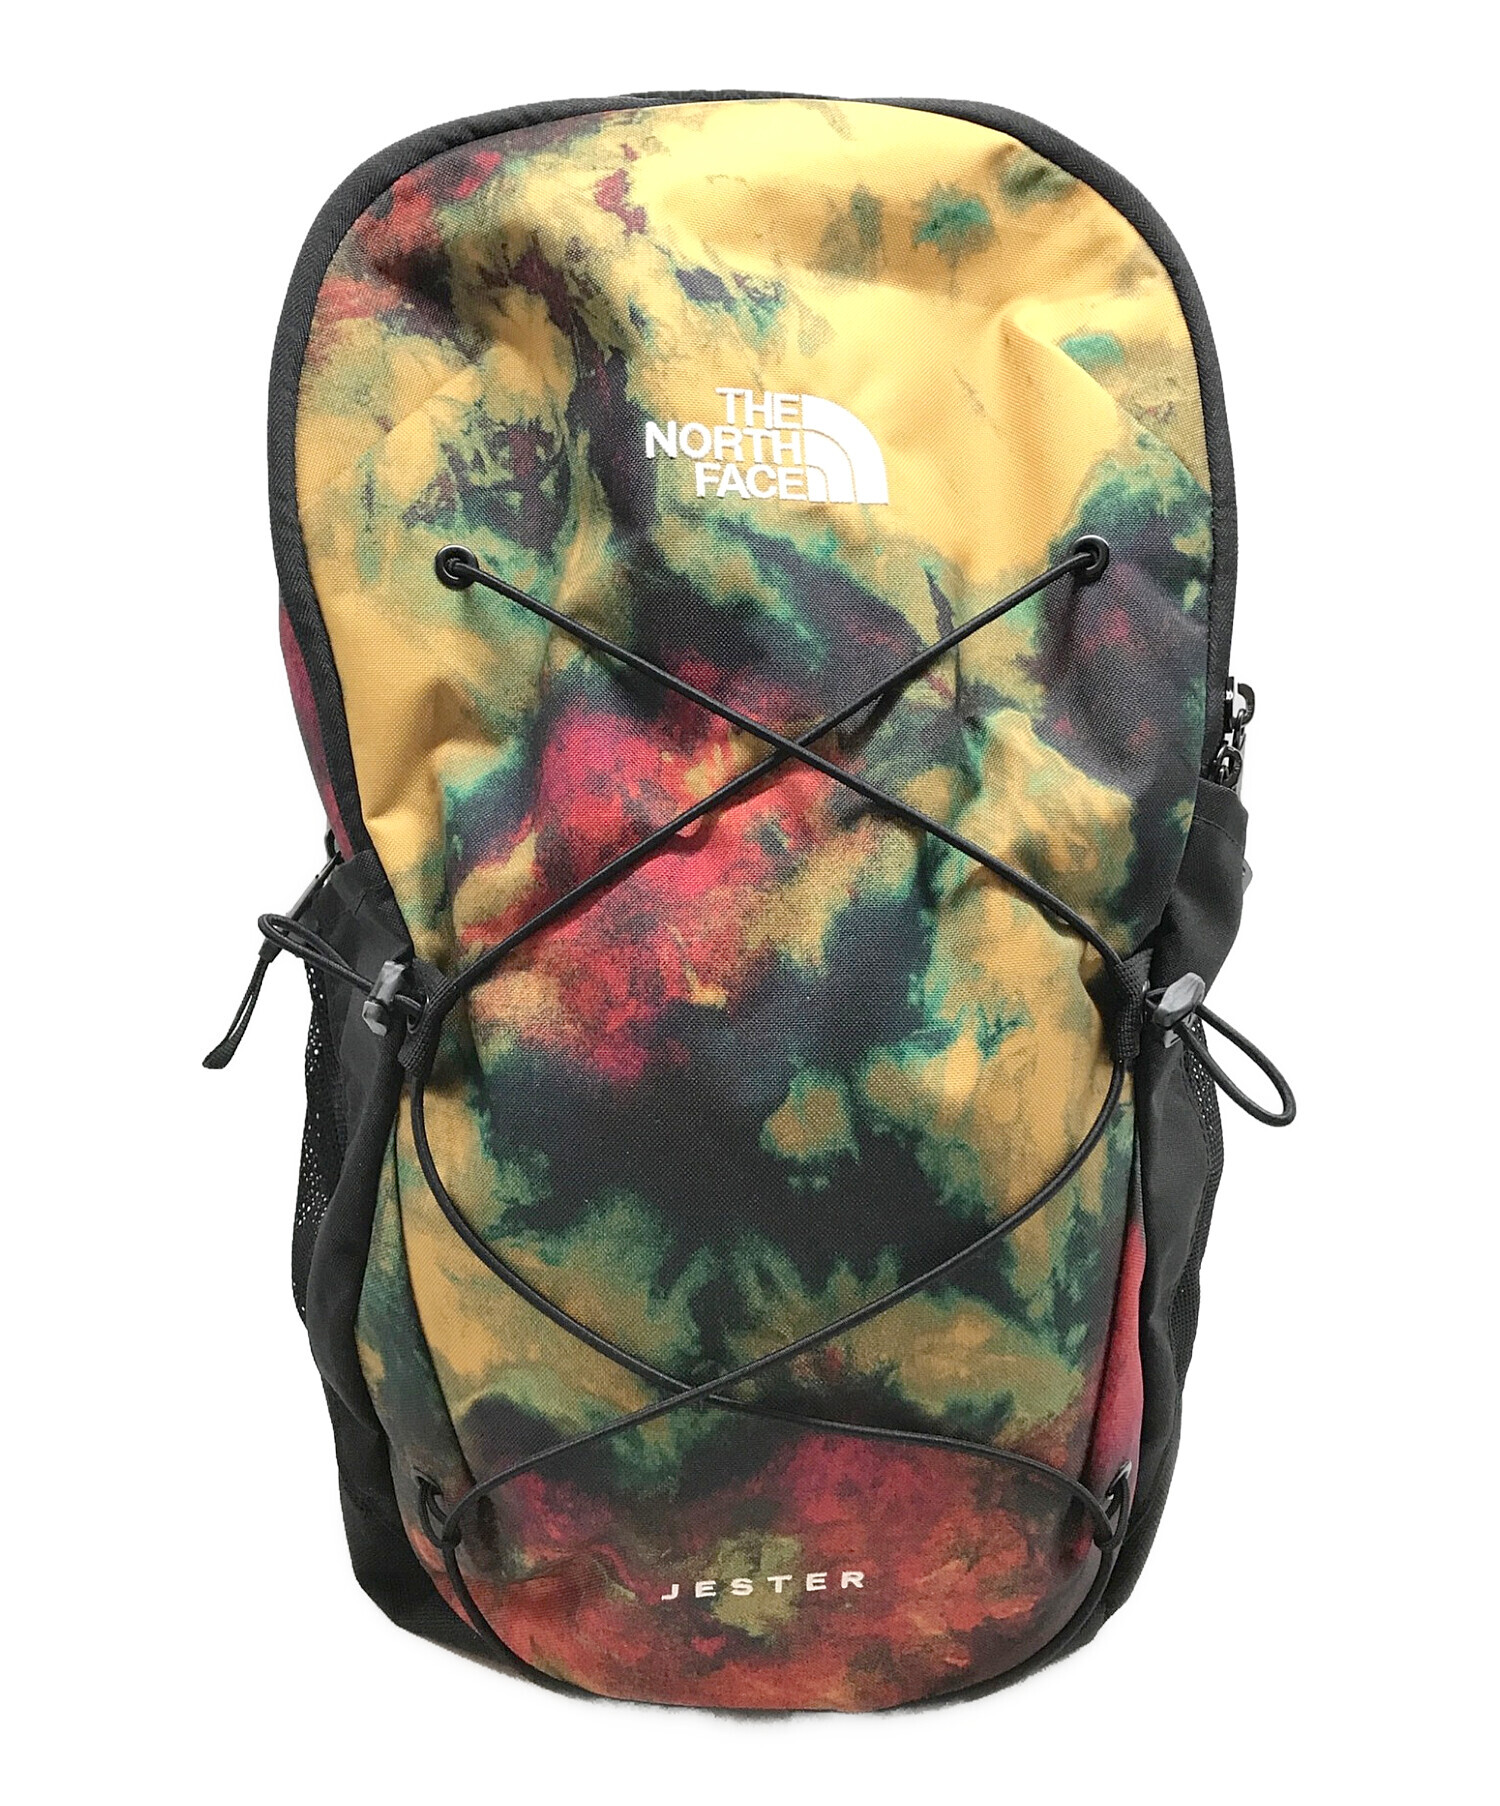 NEW格安】 THE NORTH FACE - NORTH FACE リュック JESTER 旧